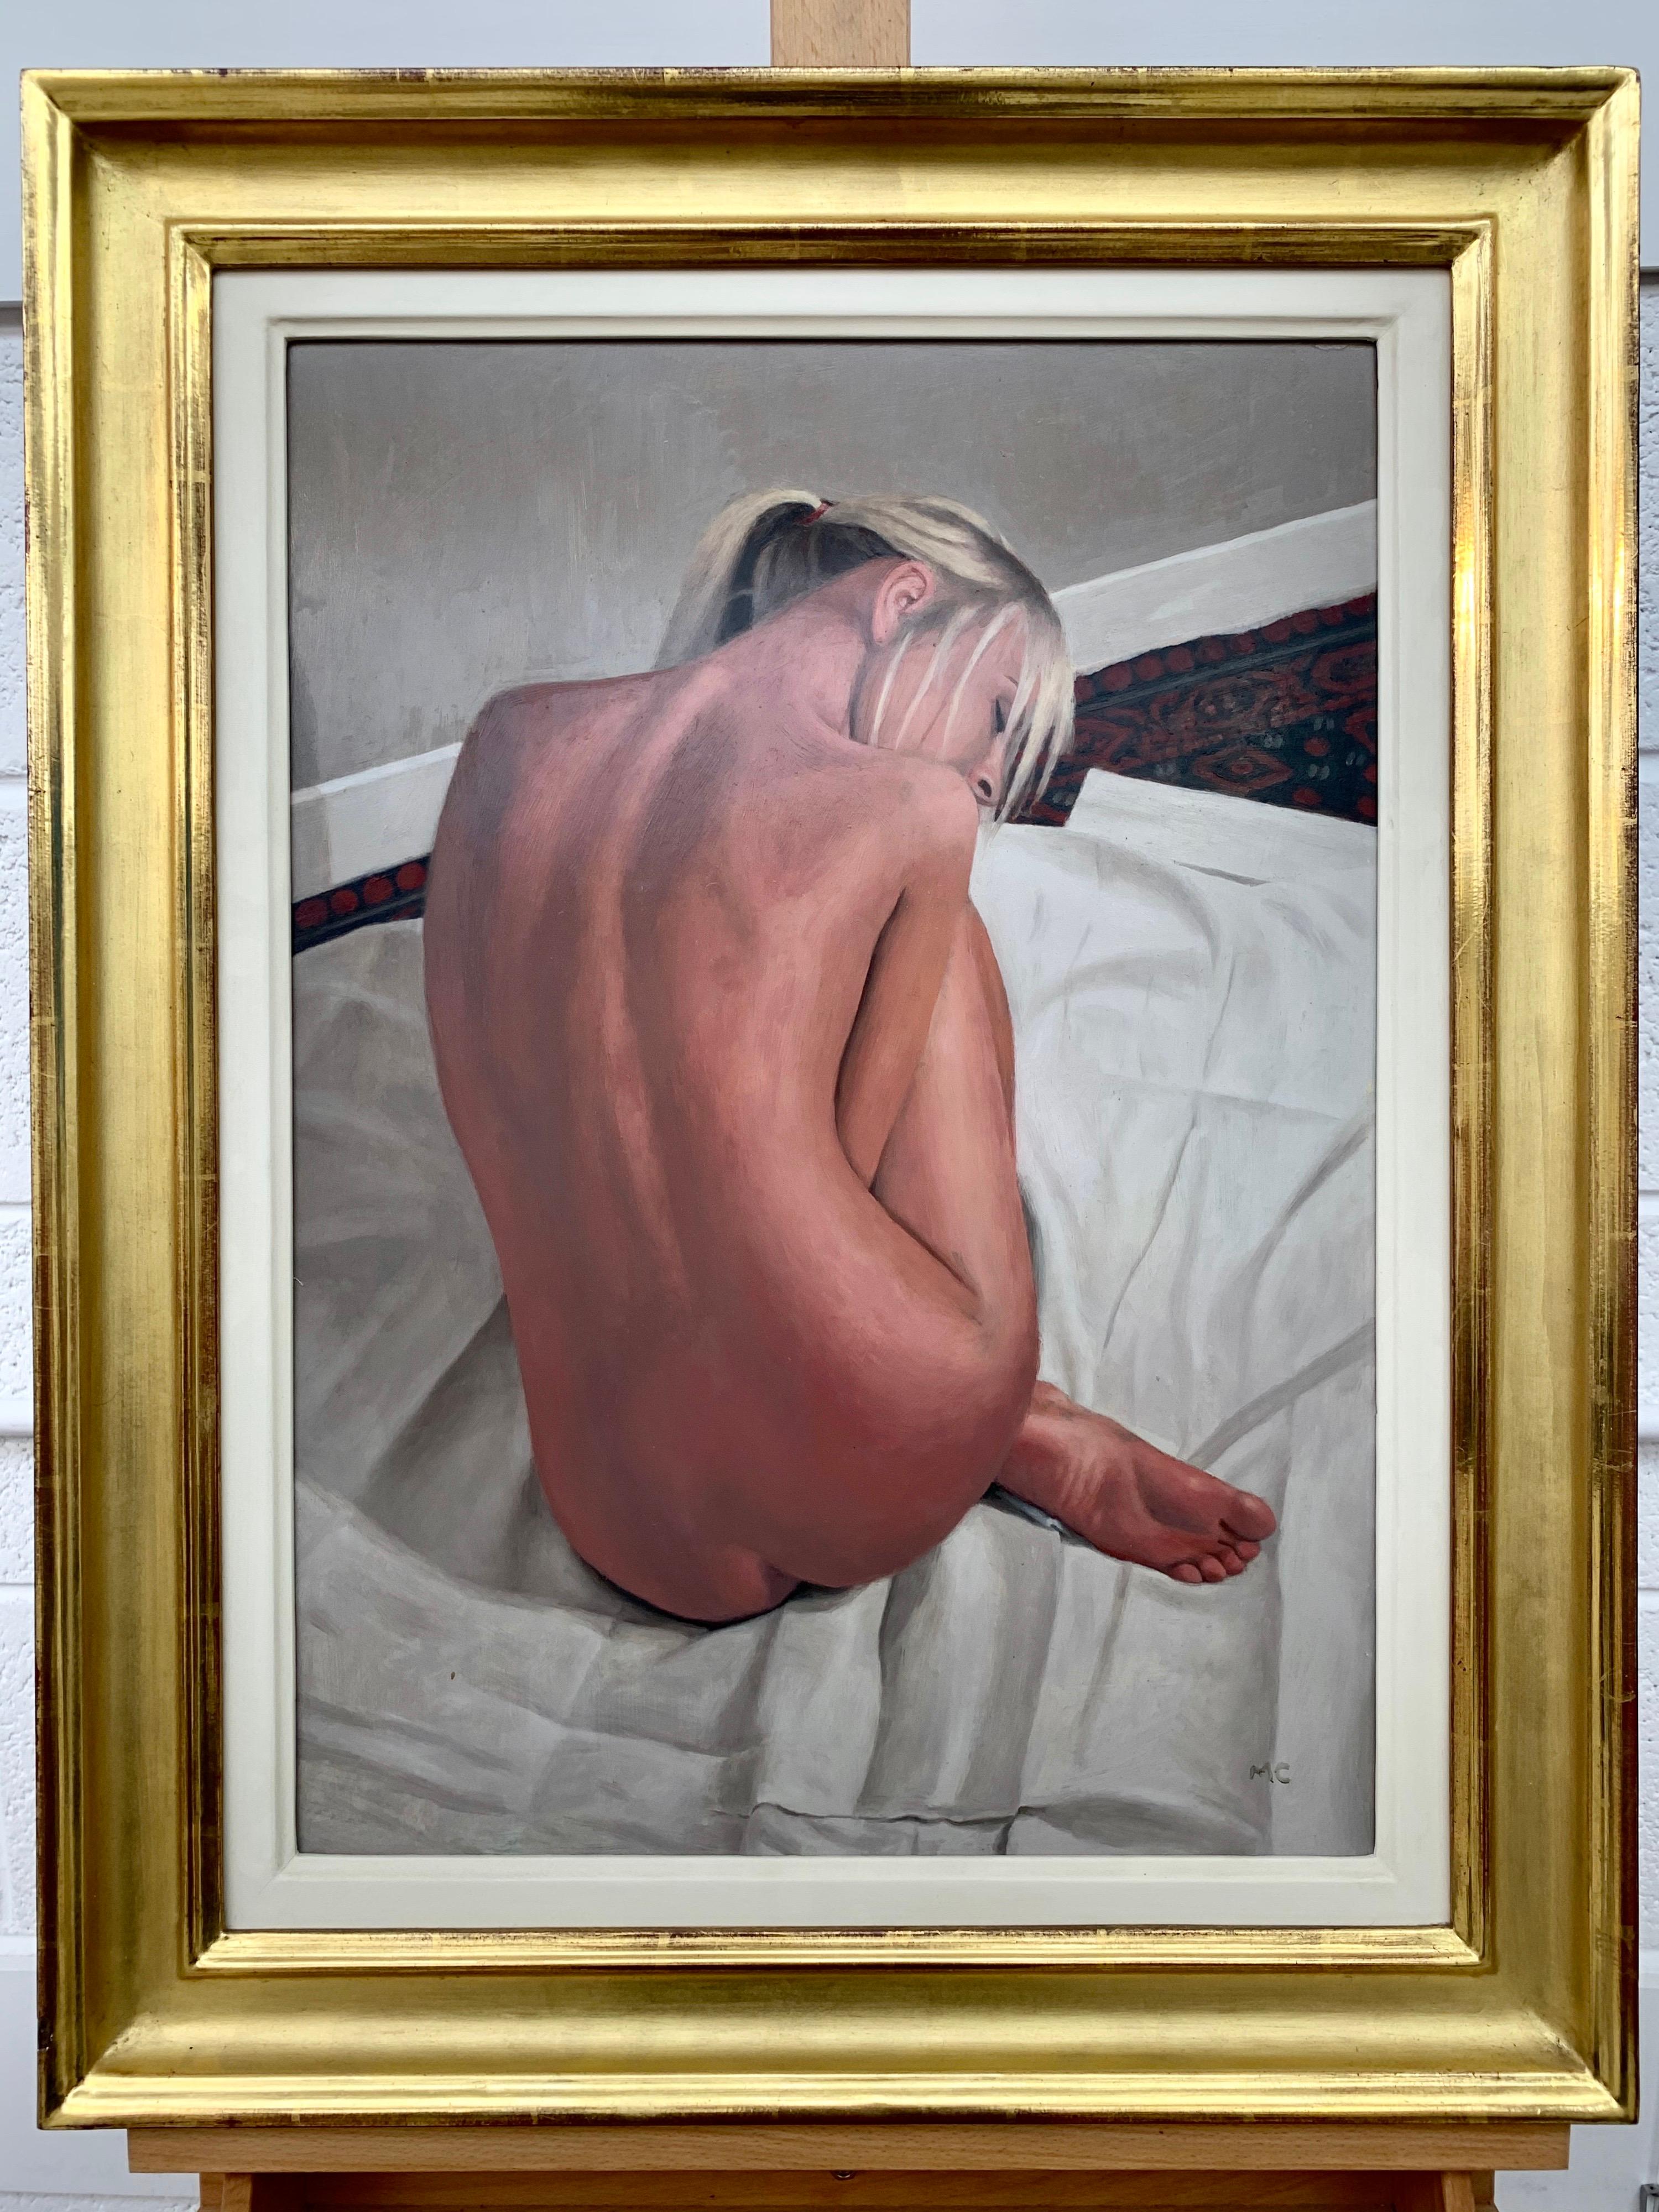 Oil Painting of Female Blonde Nude Figure on Bed by Contemporary British Artist For Sale 2